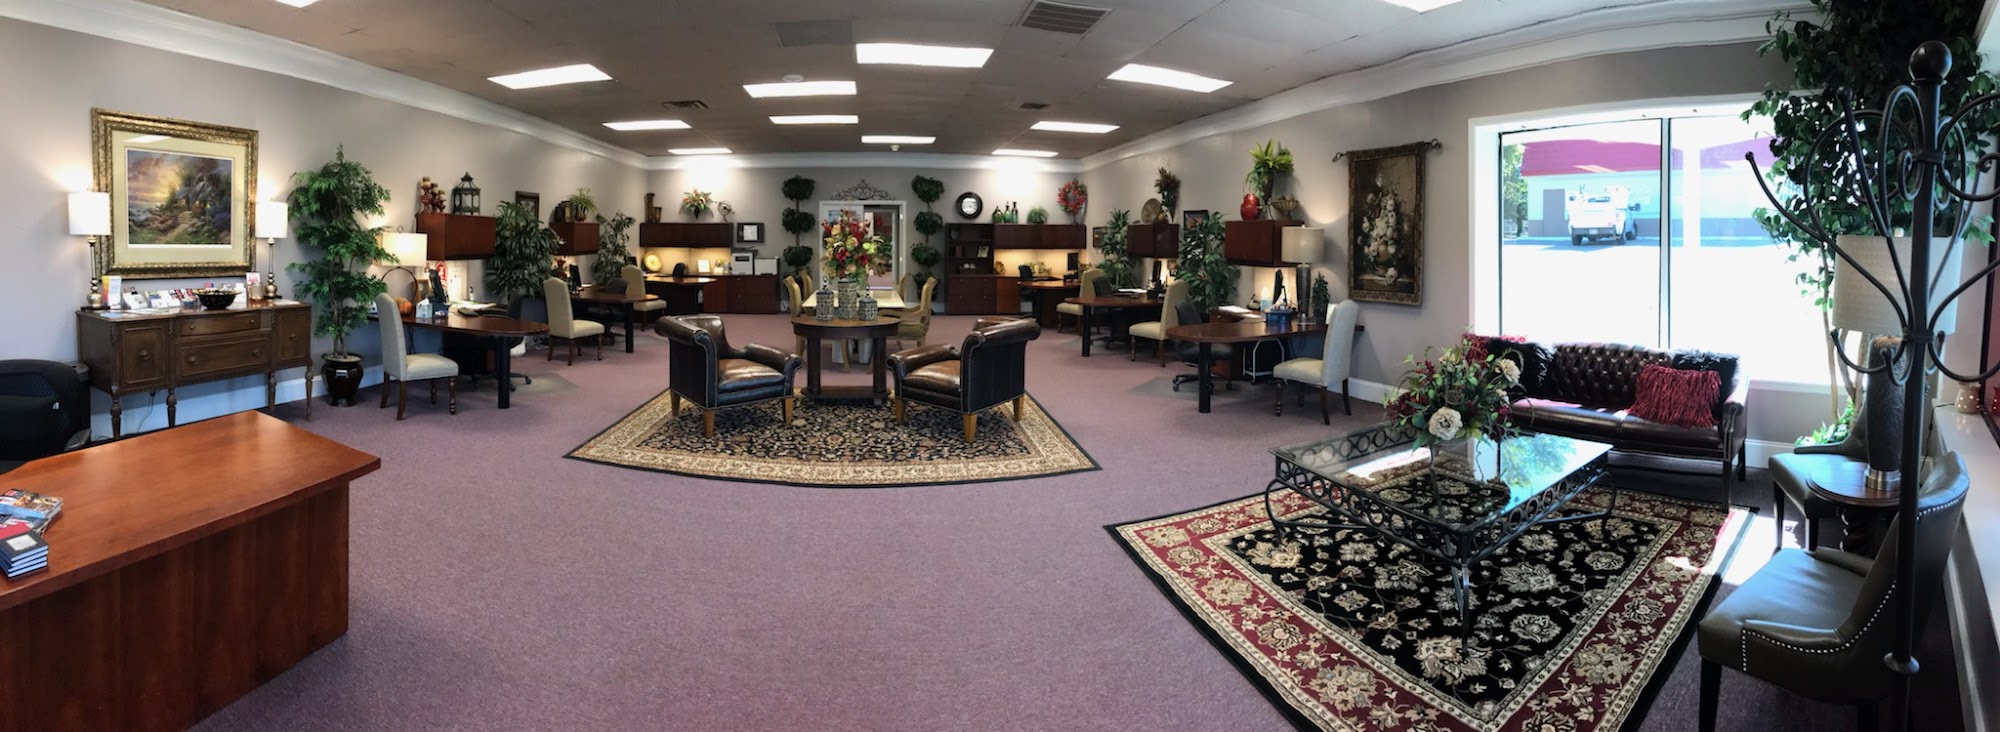 Berkshire Hathaway HomeServices Southern Routes Realty 12134 S Main St, Trenton Georgia 30752